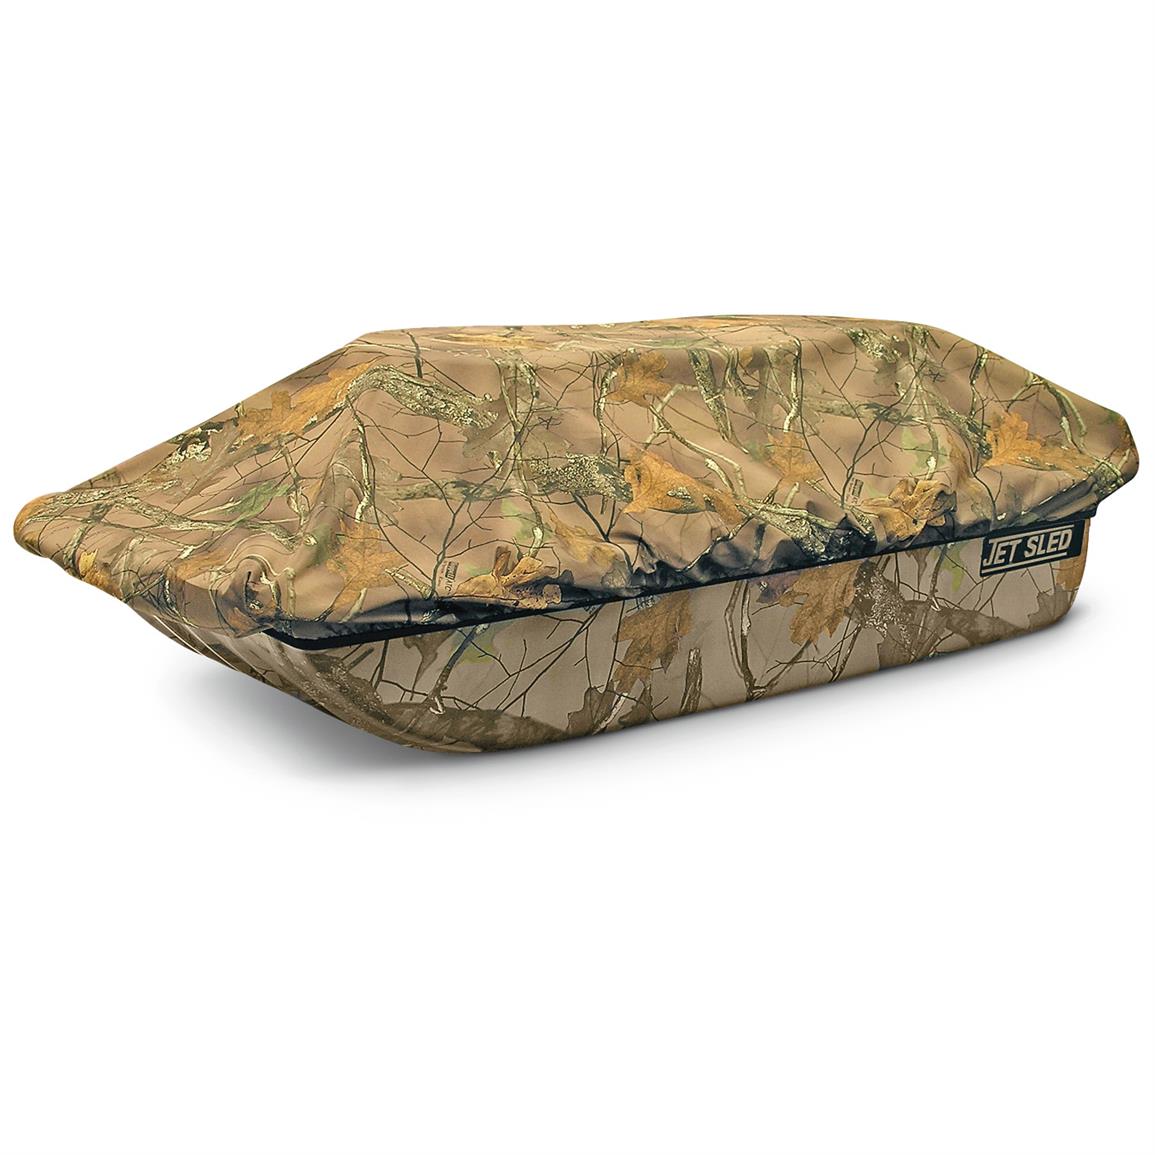 Shappell Camo Jet Sled & Matching Travel Cover Haul Duck Decoys & Waterfowl Gear 